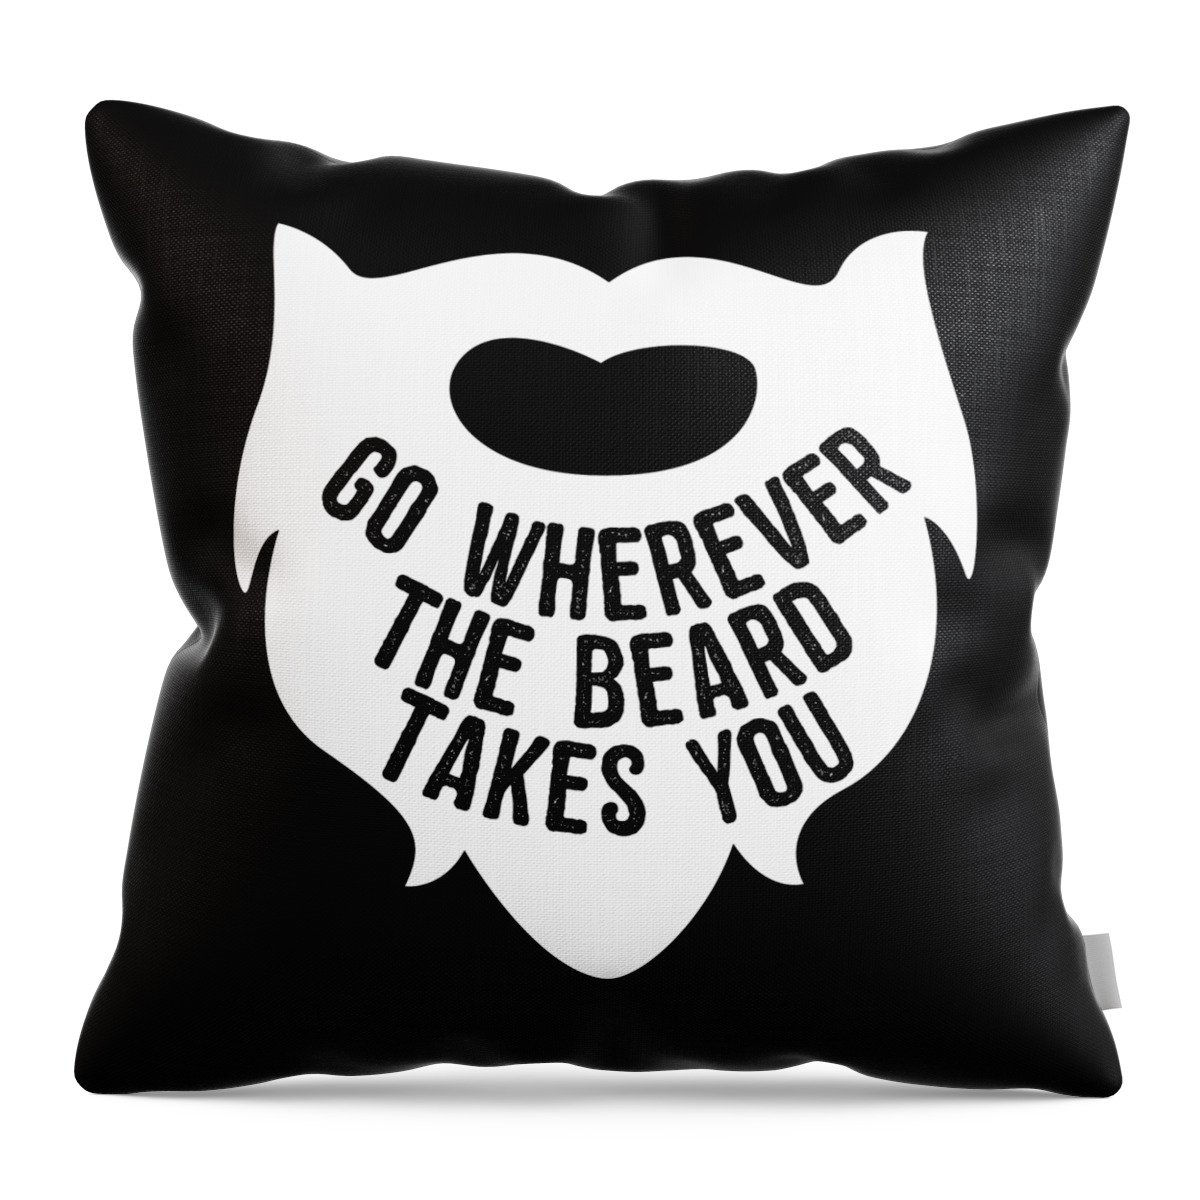 Funny Throw Pillow featuring the digital art Go Wherever The Beard Takes You by Flippin Sweet Gear